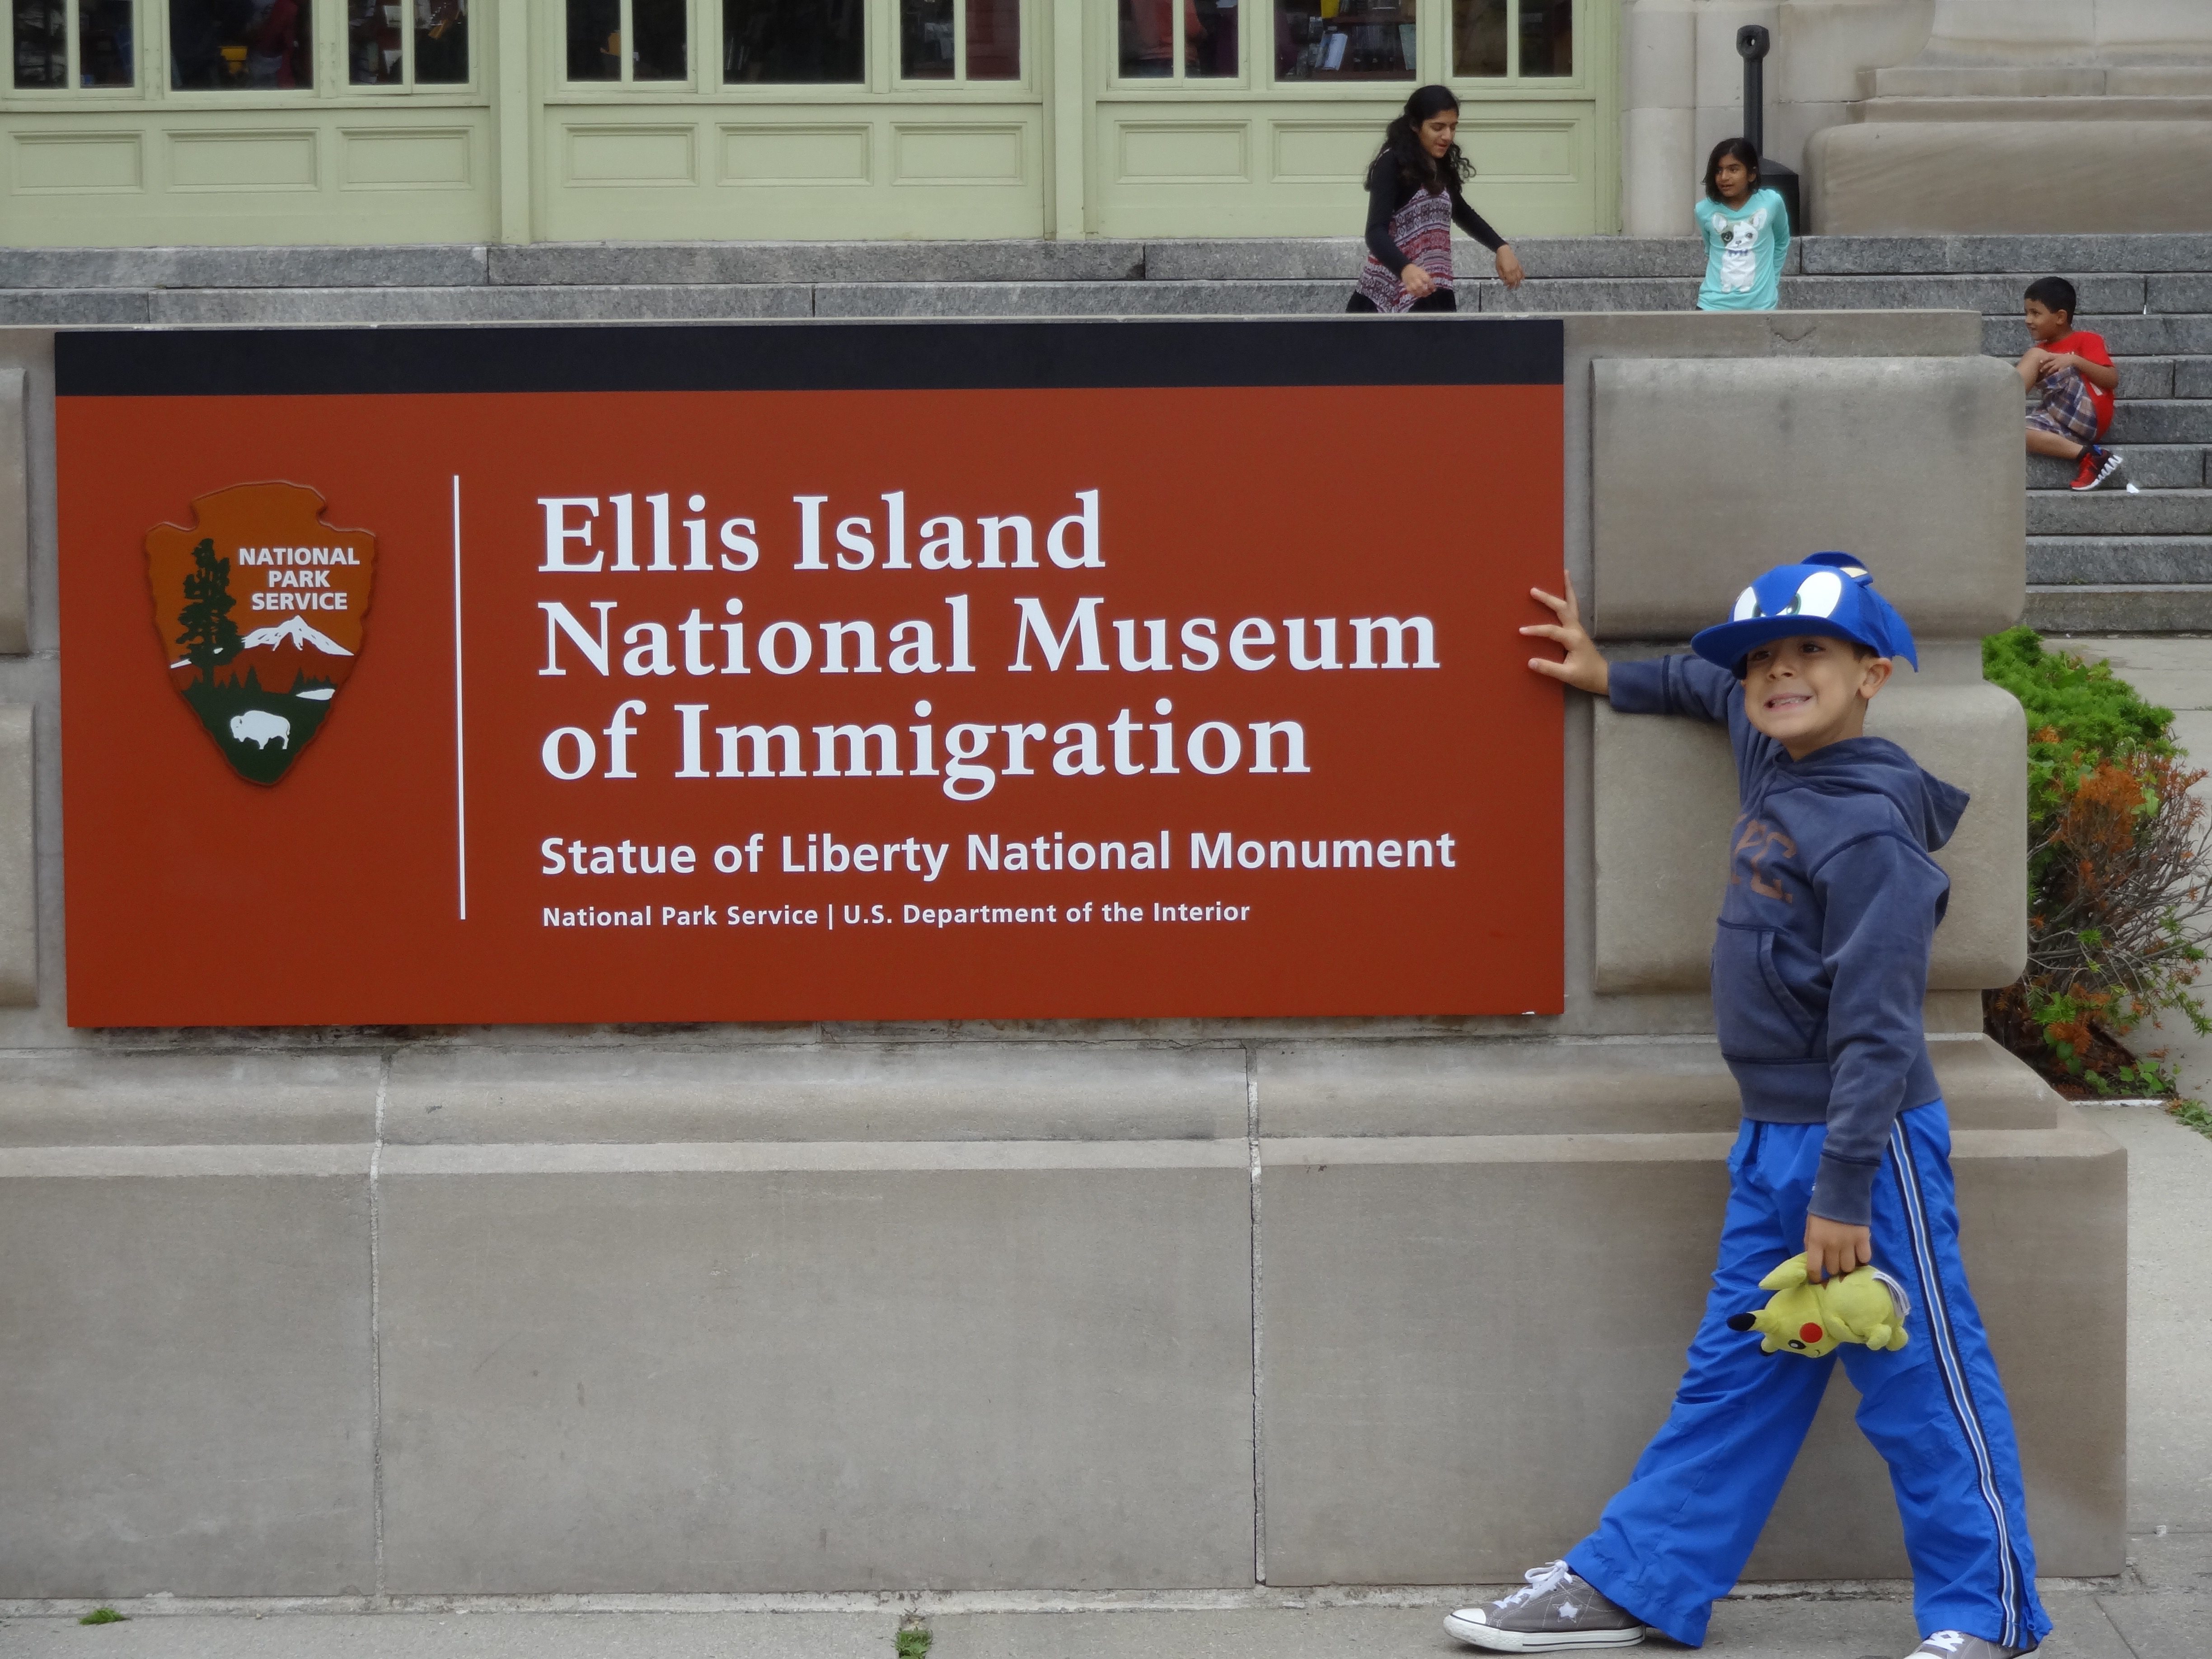 Ellis Island - Great place to visit with kids!